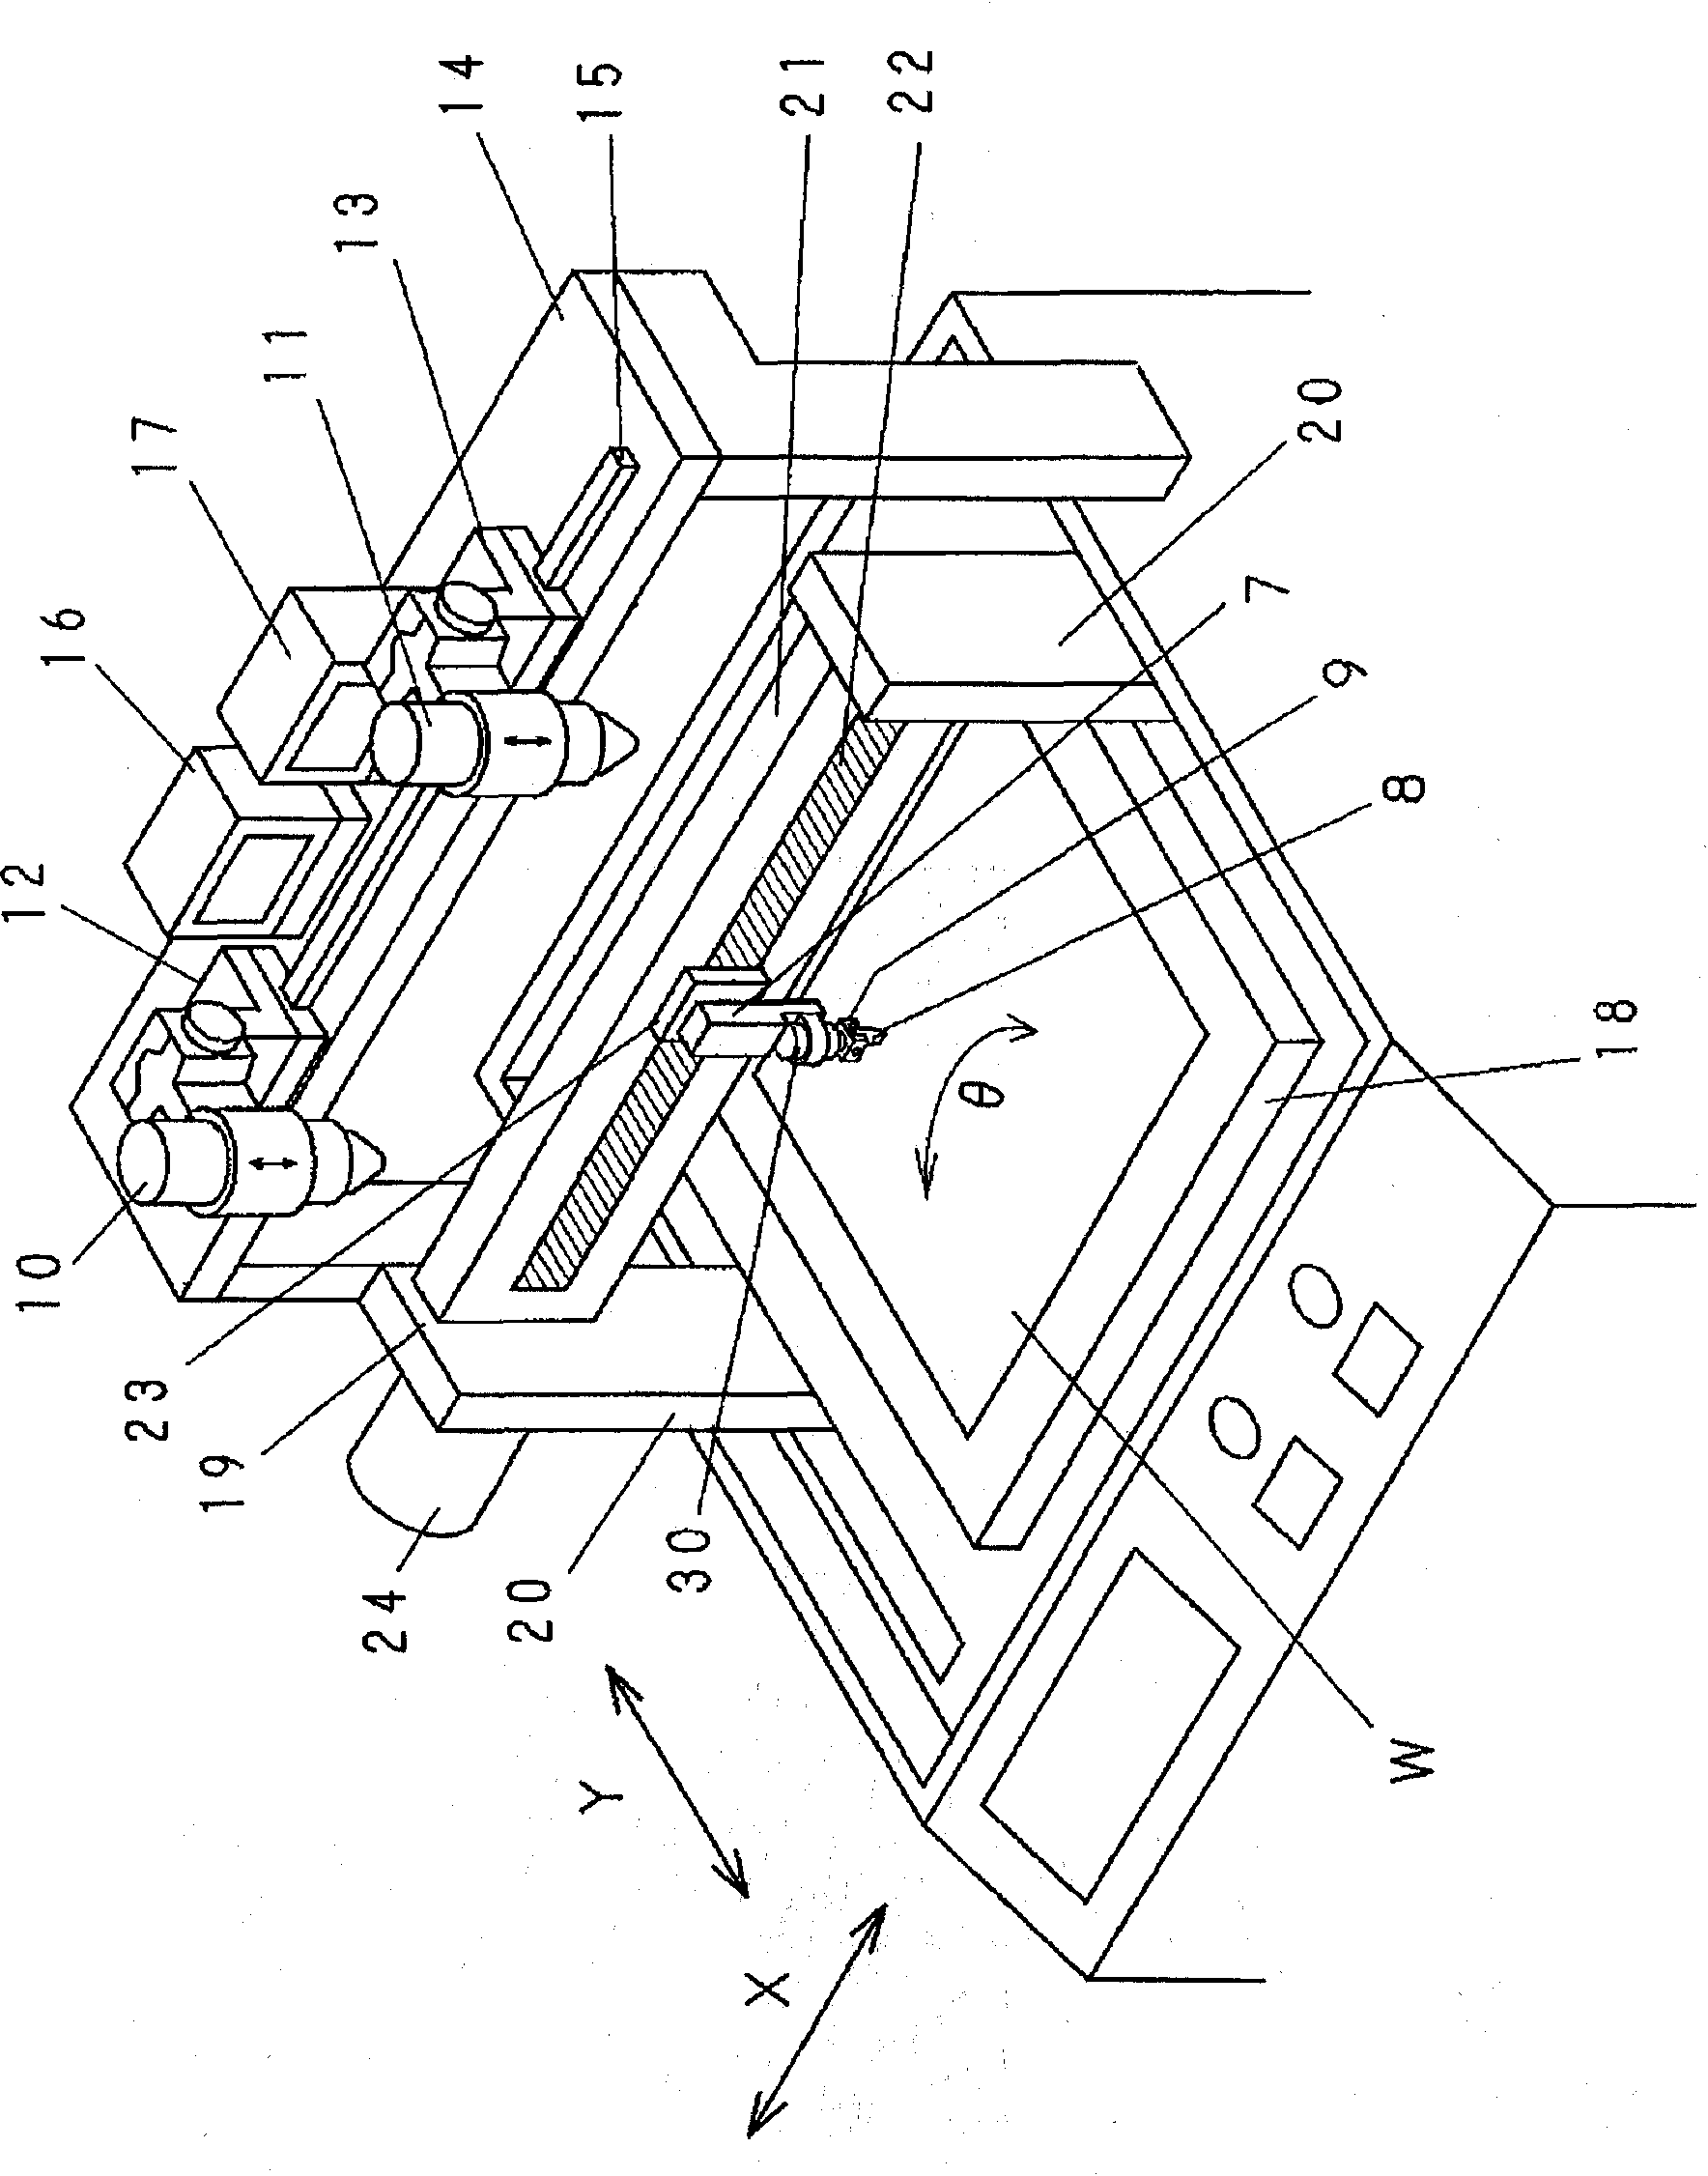 Manufacturing unit for integrated thin film solar cells